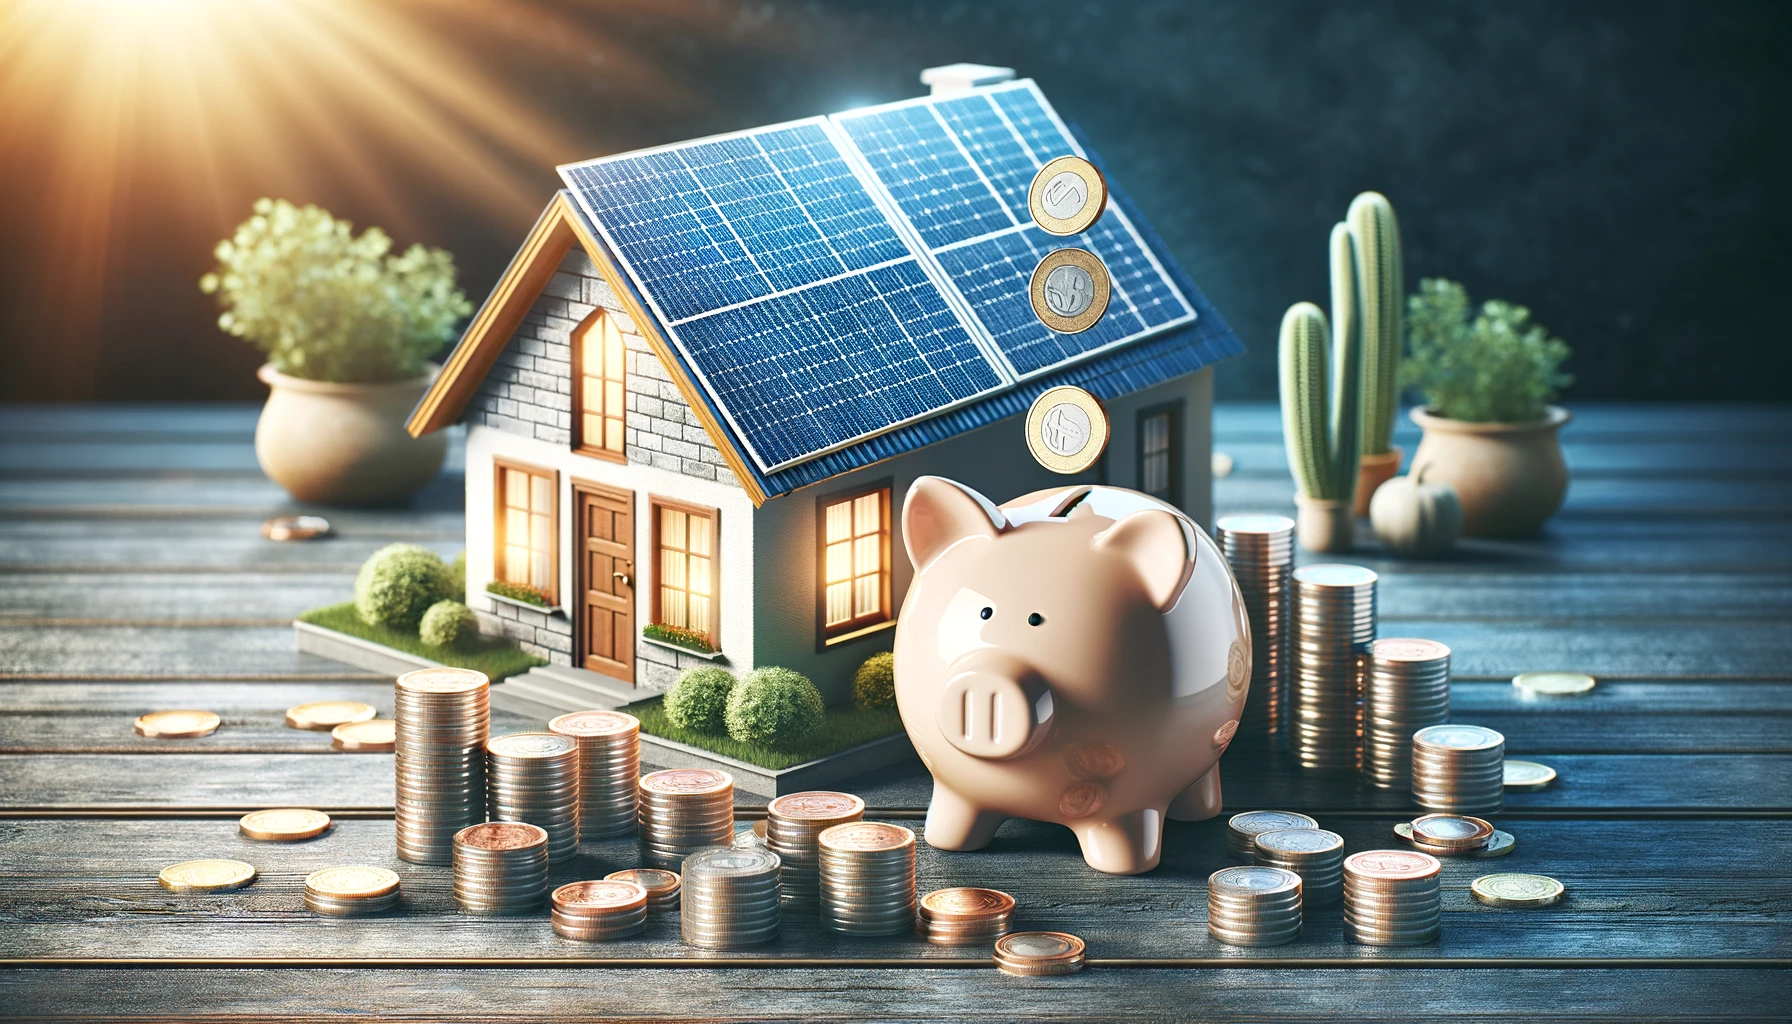 Image of a house with solar array on roof with a large pig surrounded by stacks of coins to represent savings